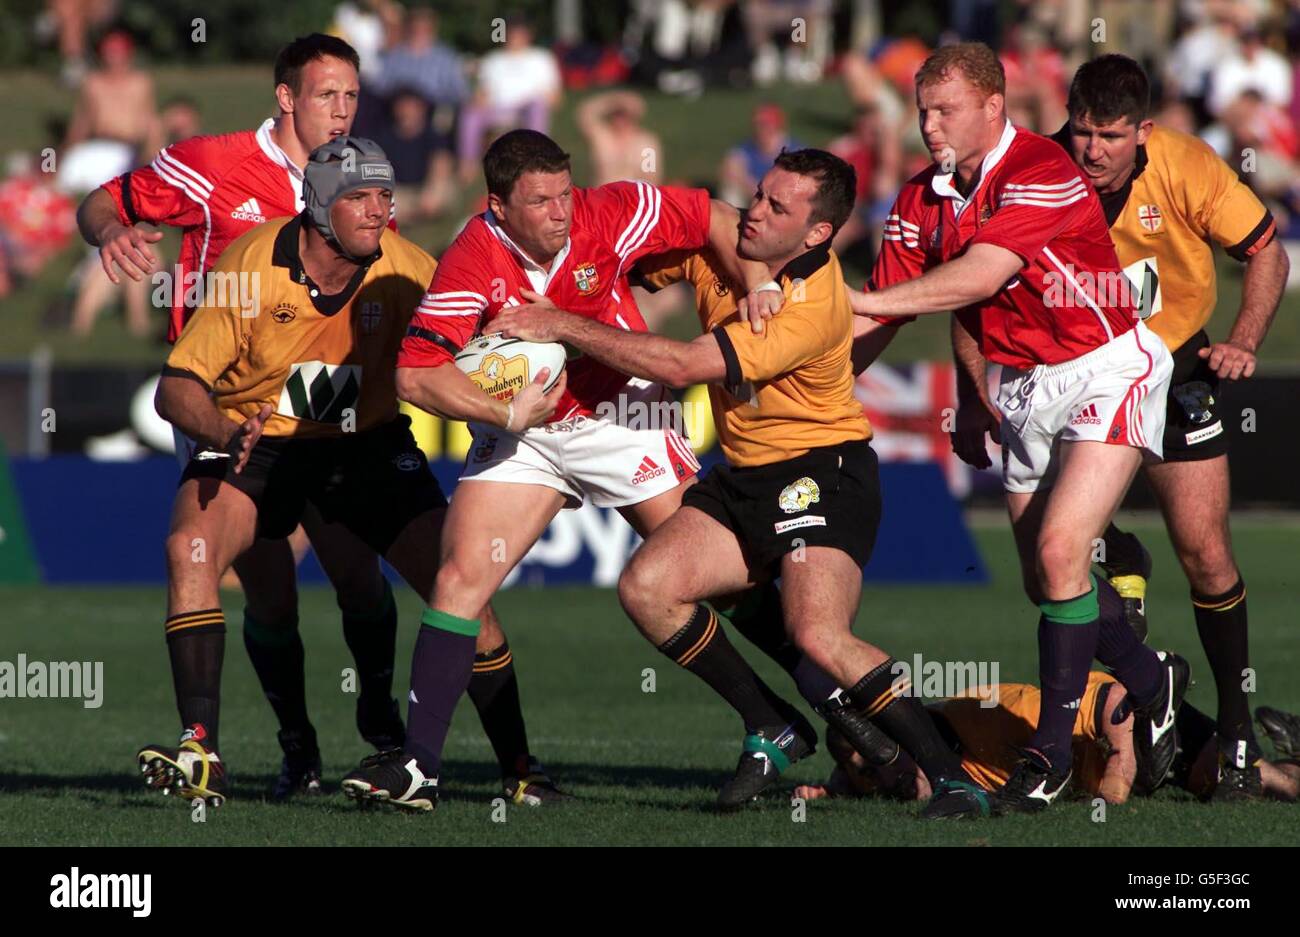 British and Irish Lions player Scott Gibbs (3rd left) attempts to break past NSW Country's Kieran Shepherd, during their rugby union tour match at Coffs Harbour, in Australia. Stock Photo